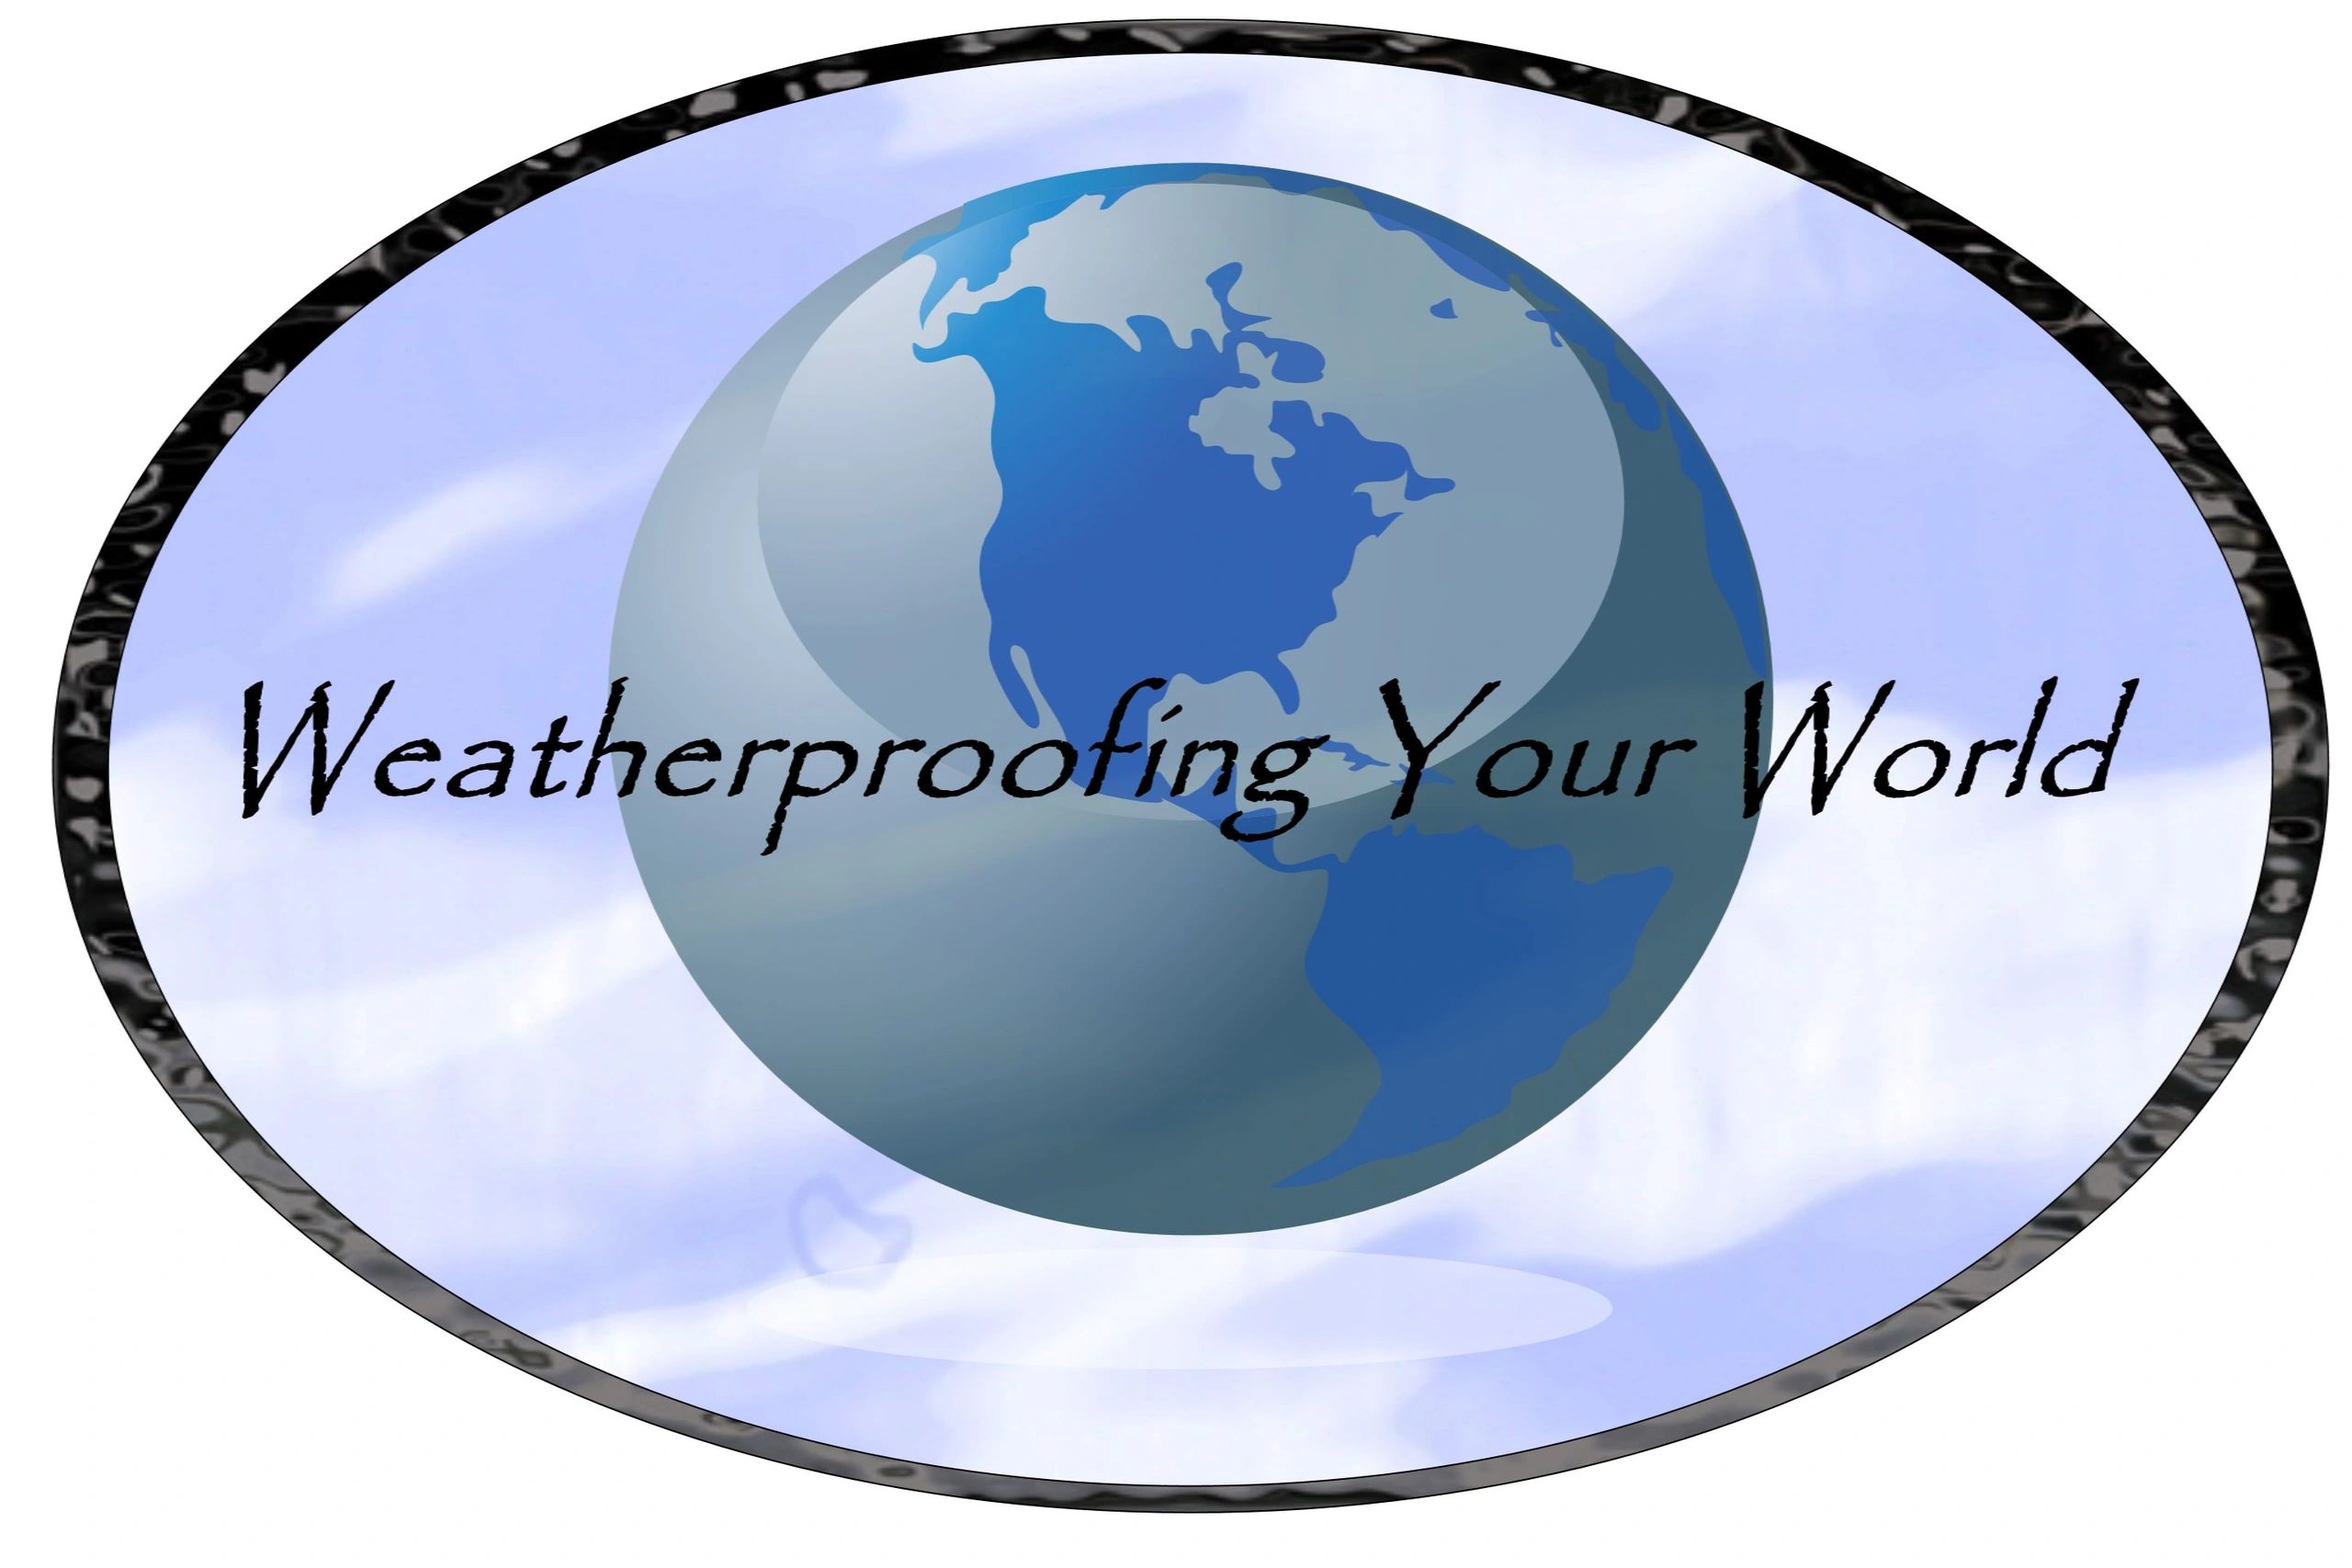 Words, Weatherproofing your World, in front of a picture of the Earth.